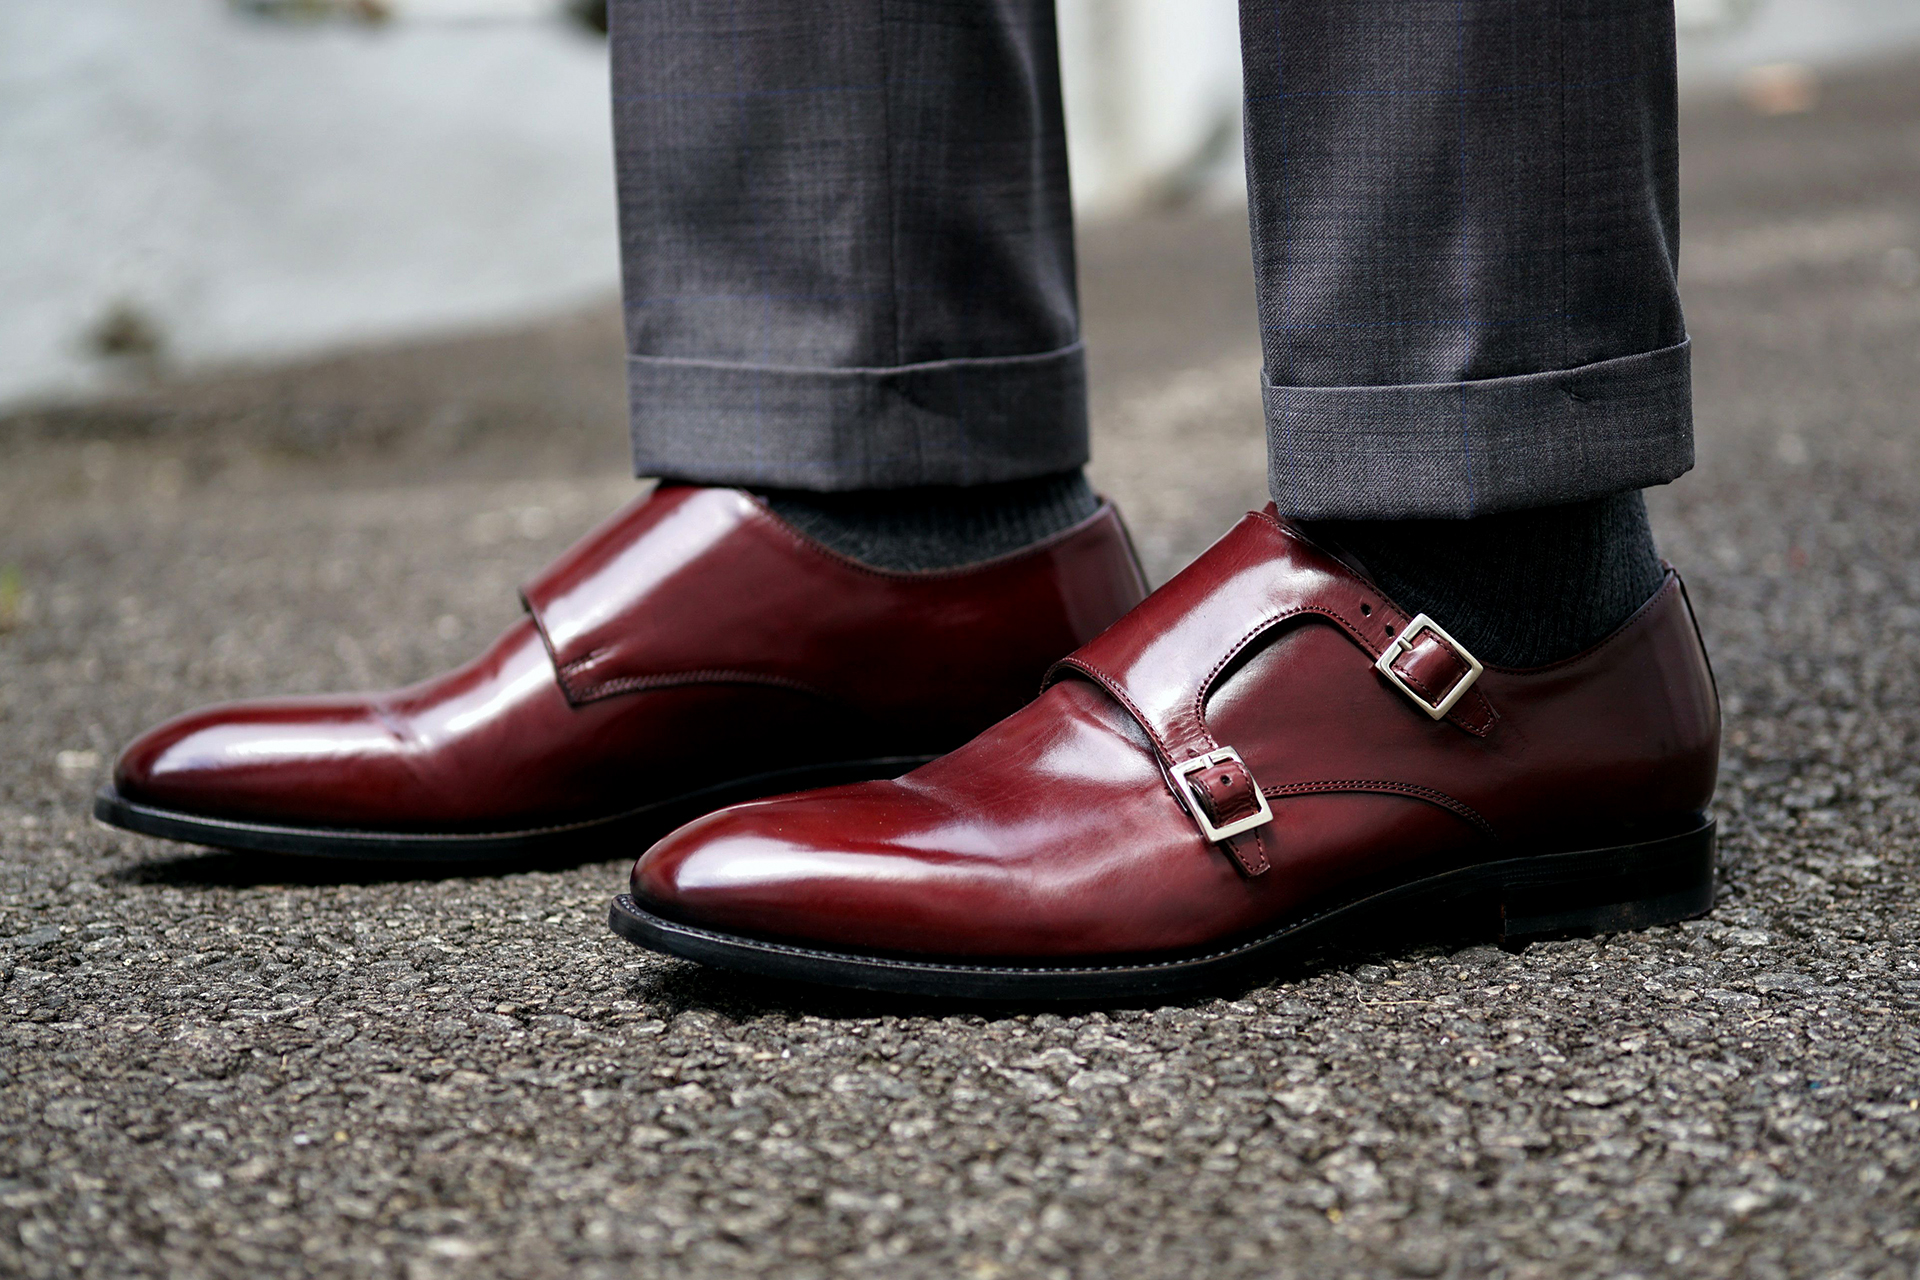 wearing oxblood burgundy dress shoes with charcoal grey pants